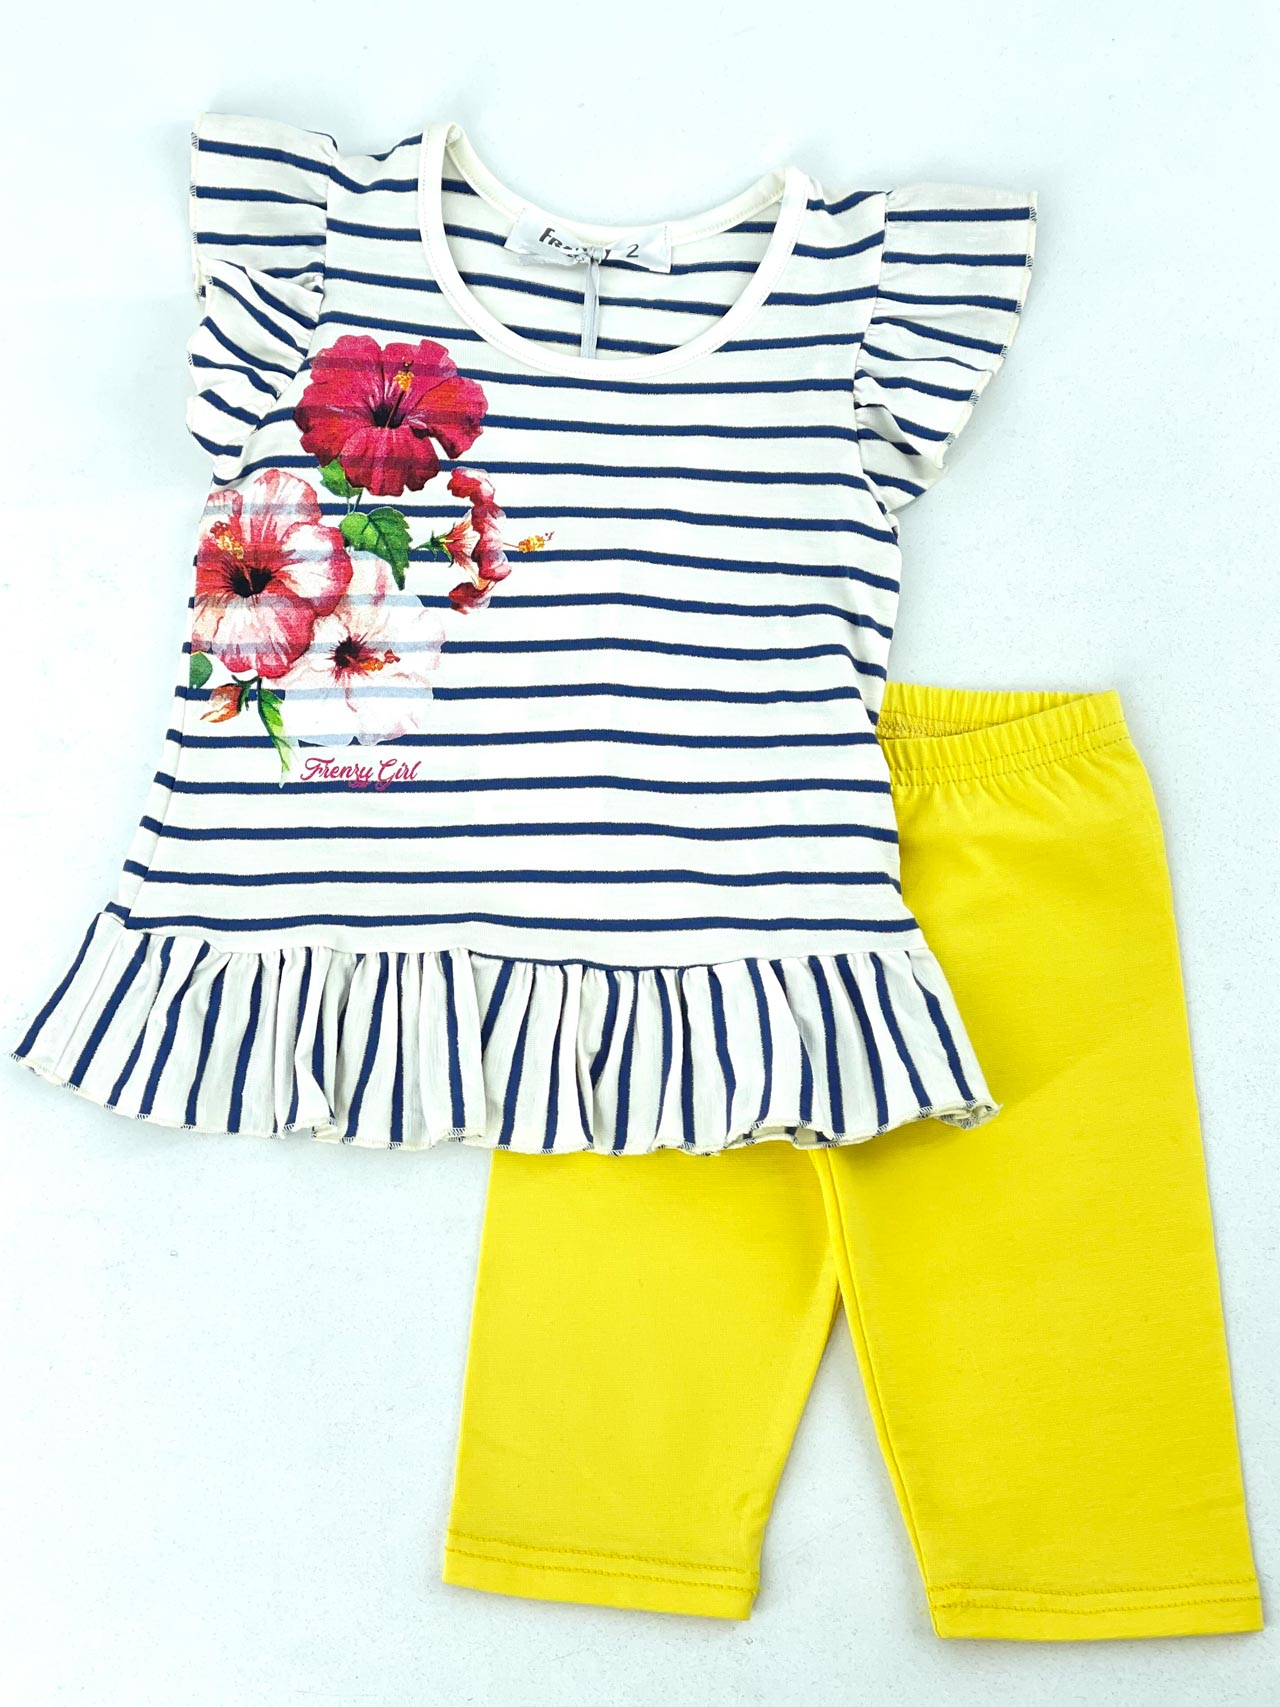 Striped girl set with pilex code 62915153